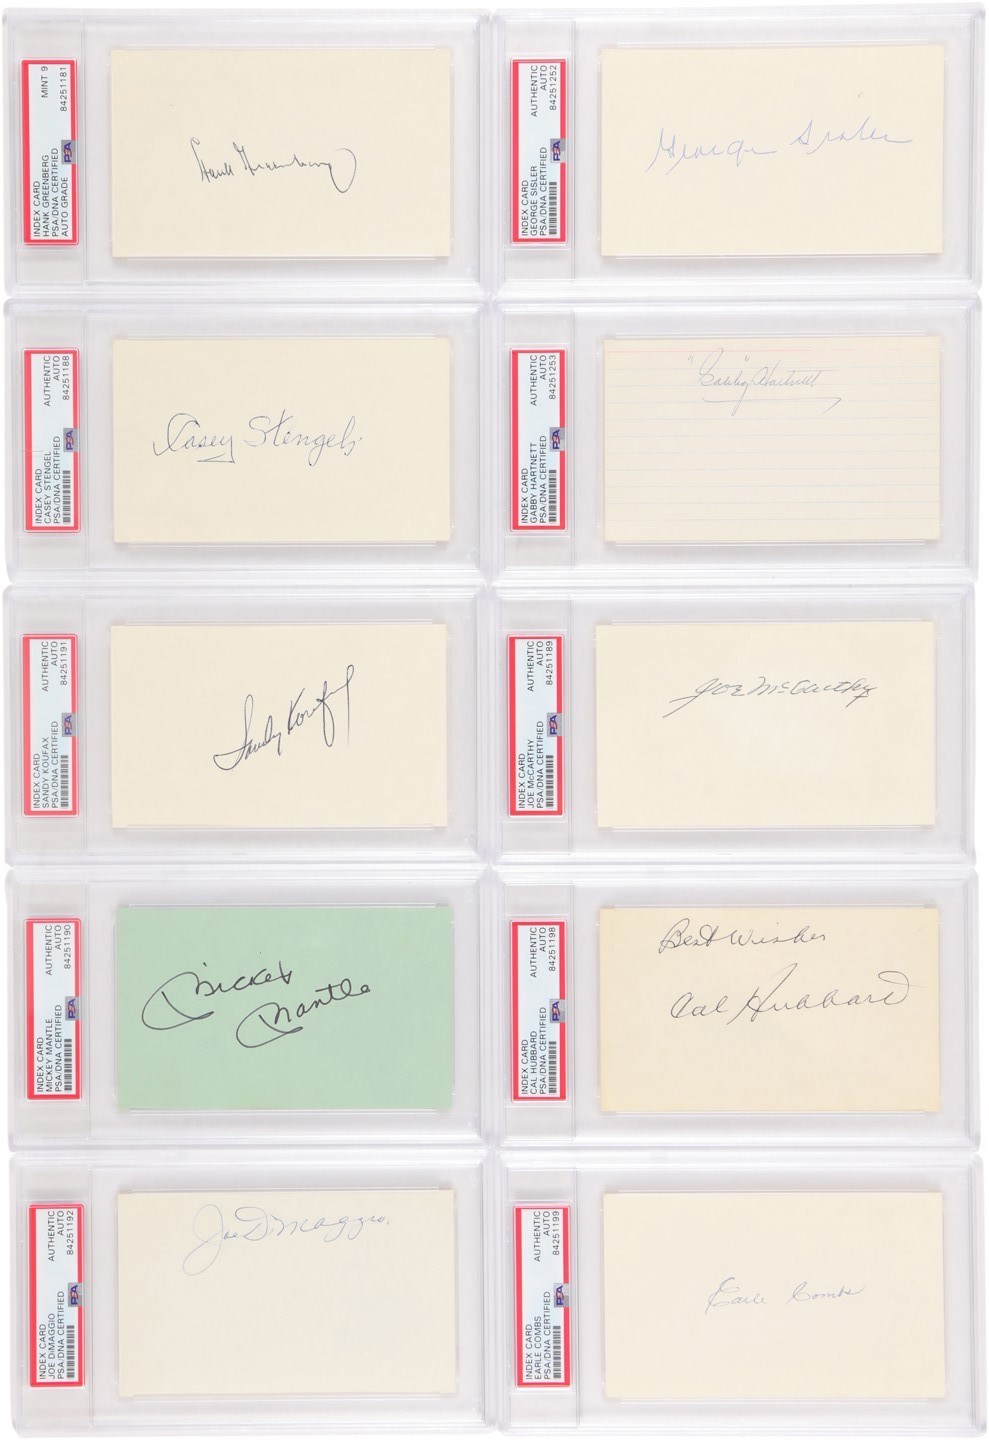 Baseball Autographs - Baseball Hall of Famers PSA Authenticated Signed Index Card Archive (77)